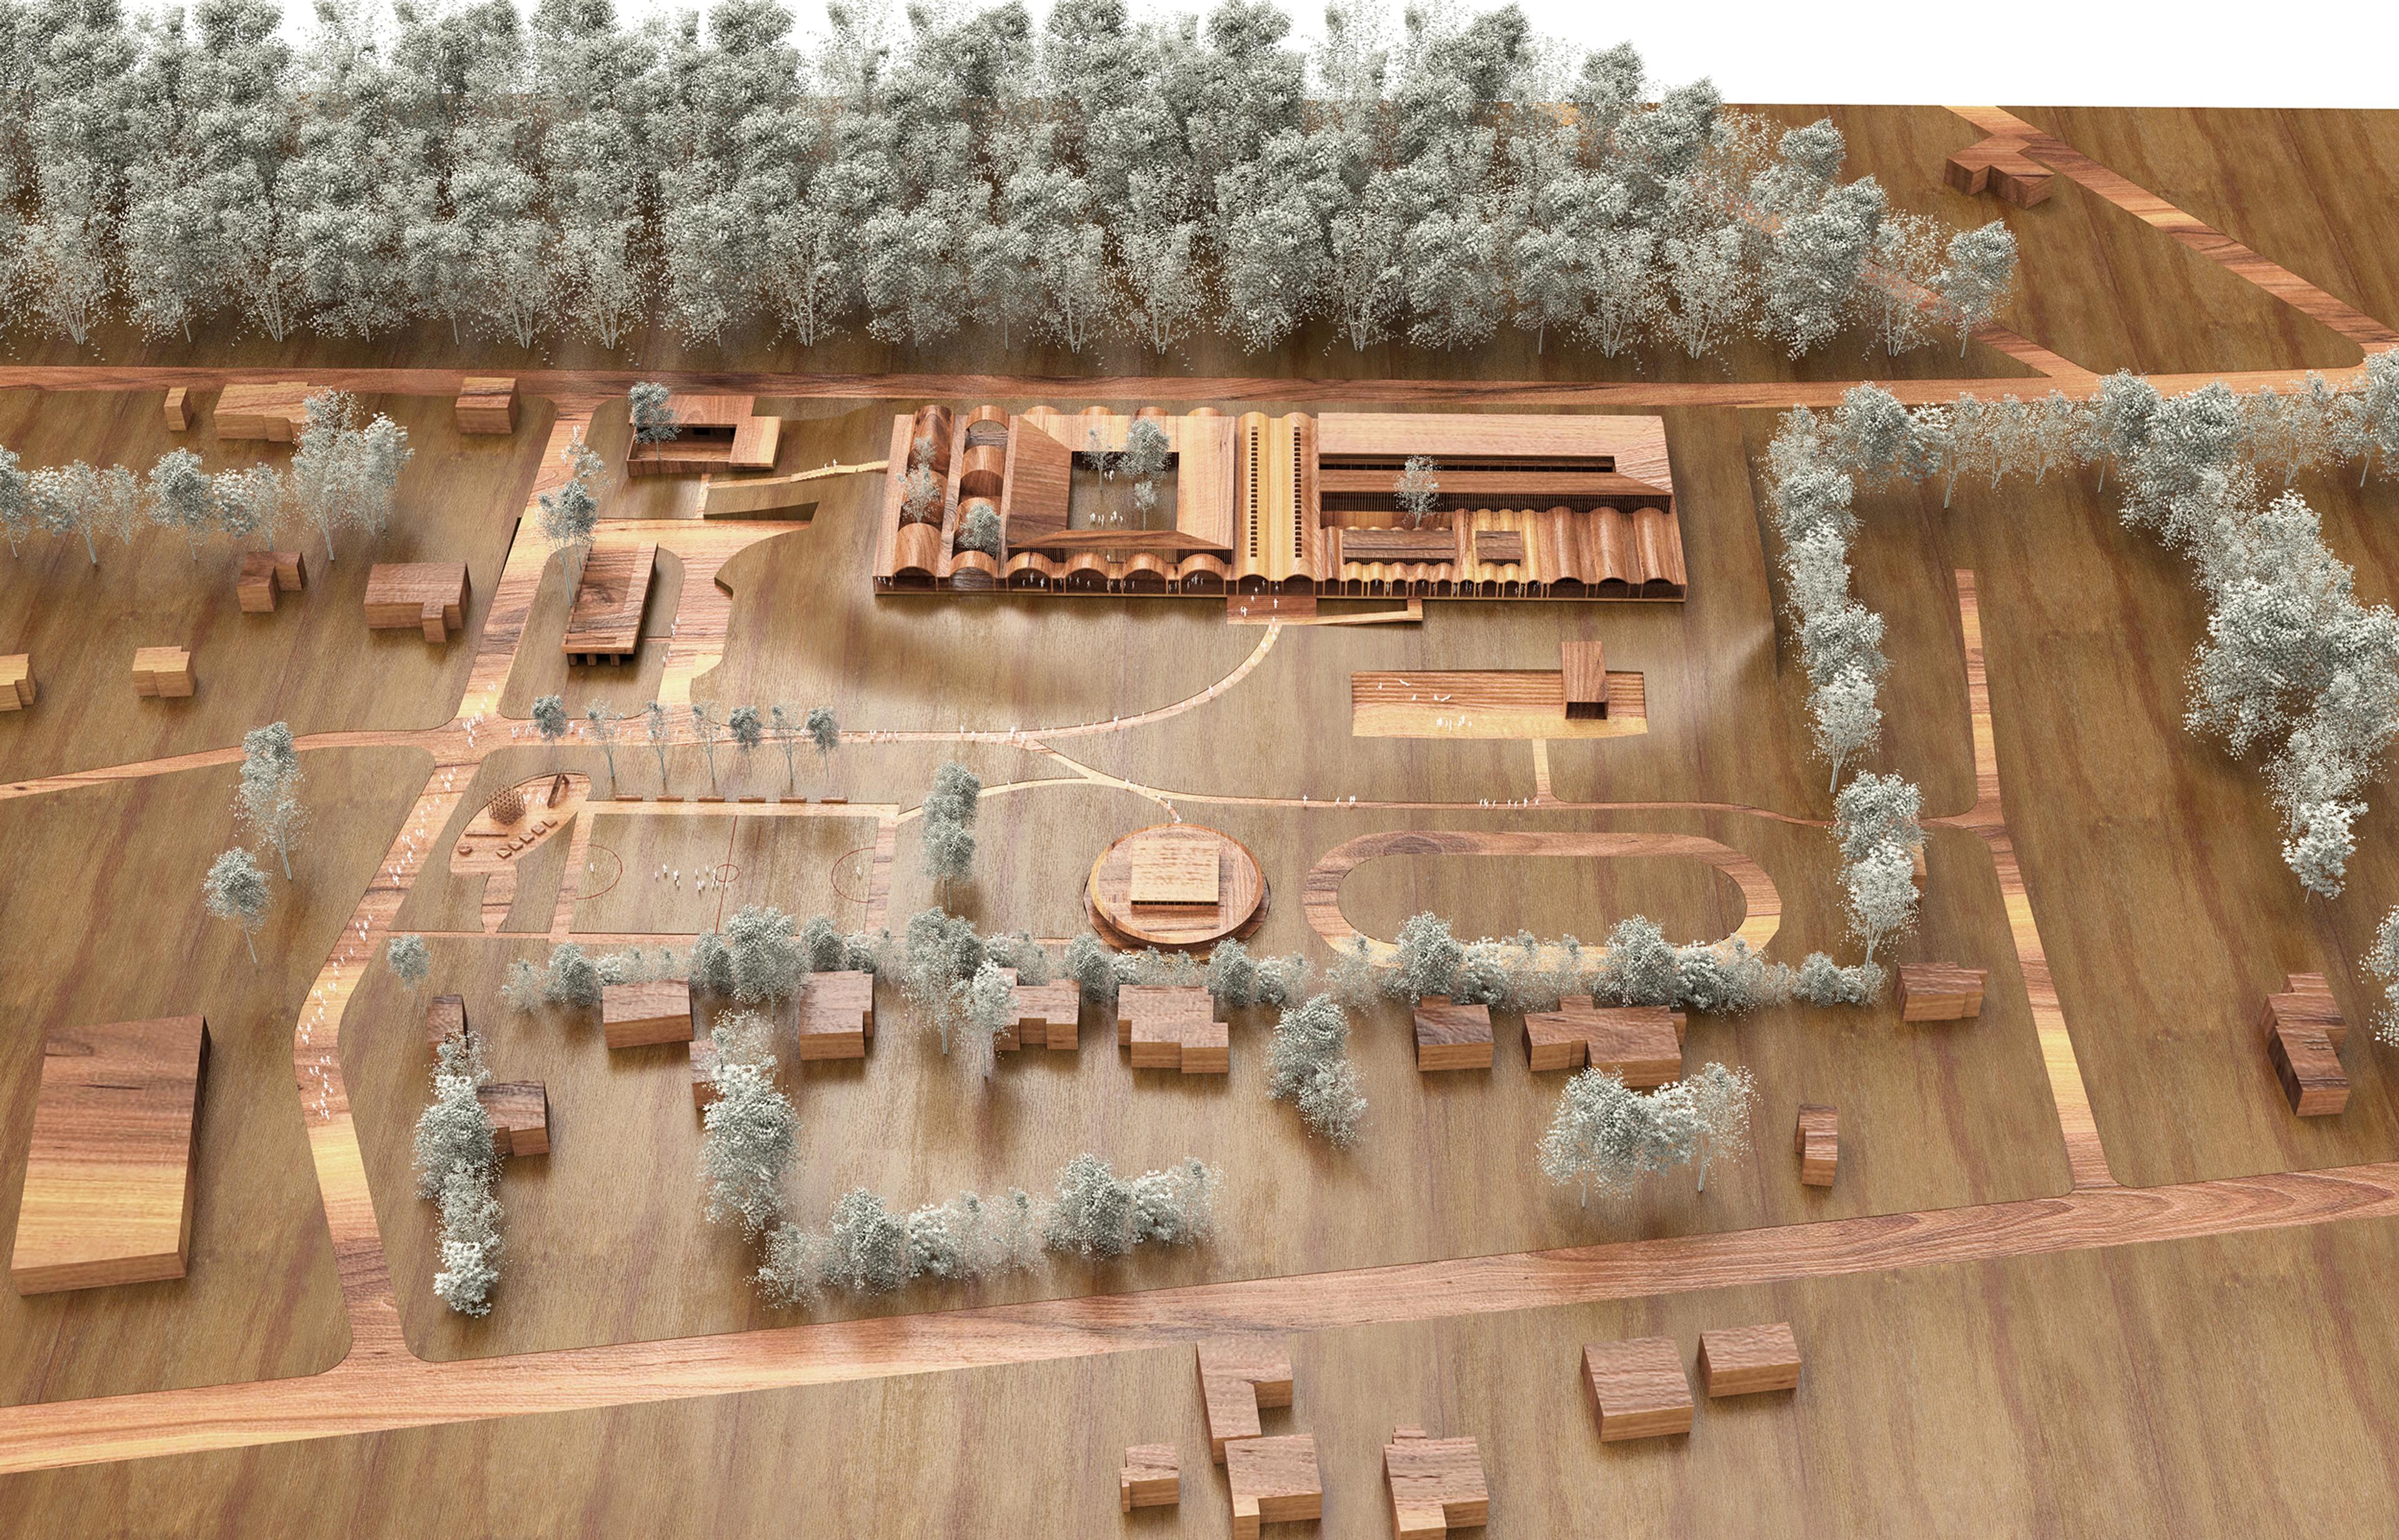 physical model of a proposed school